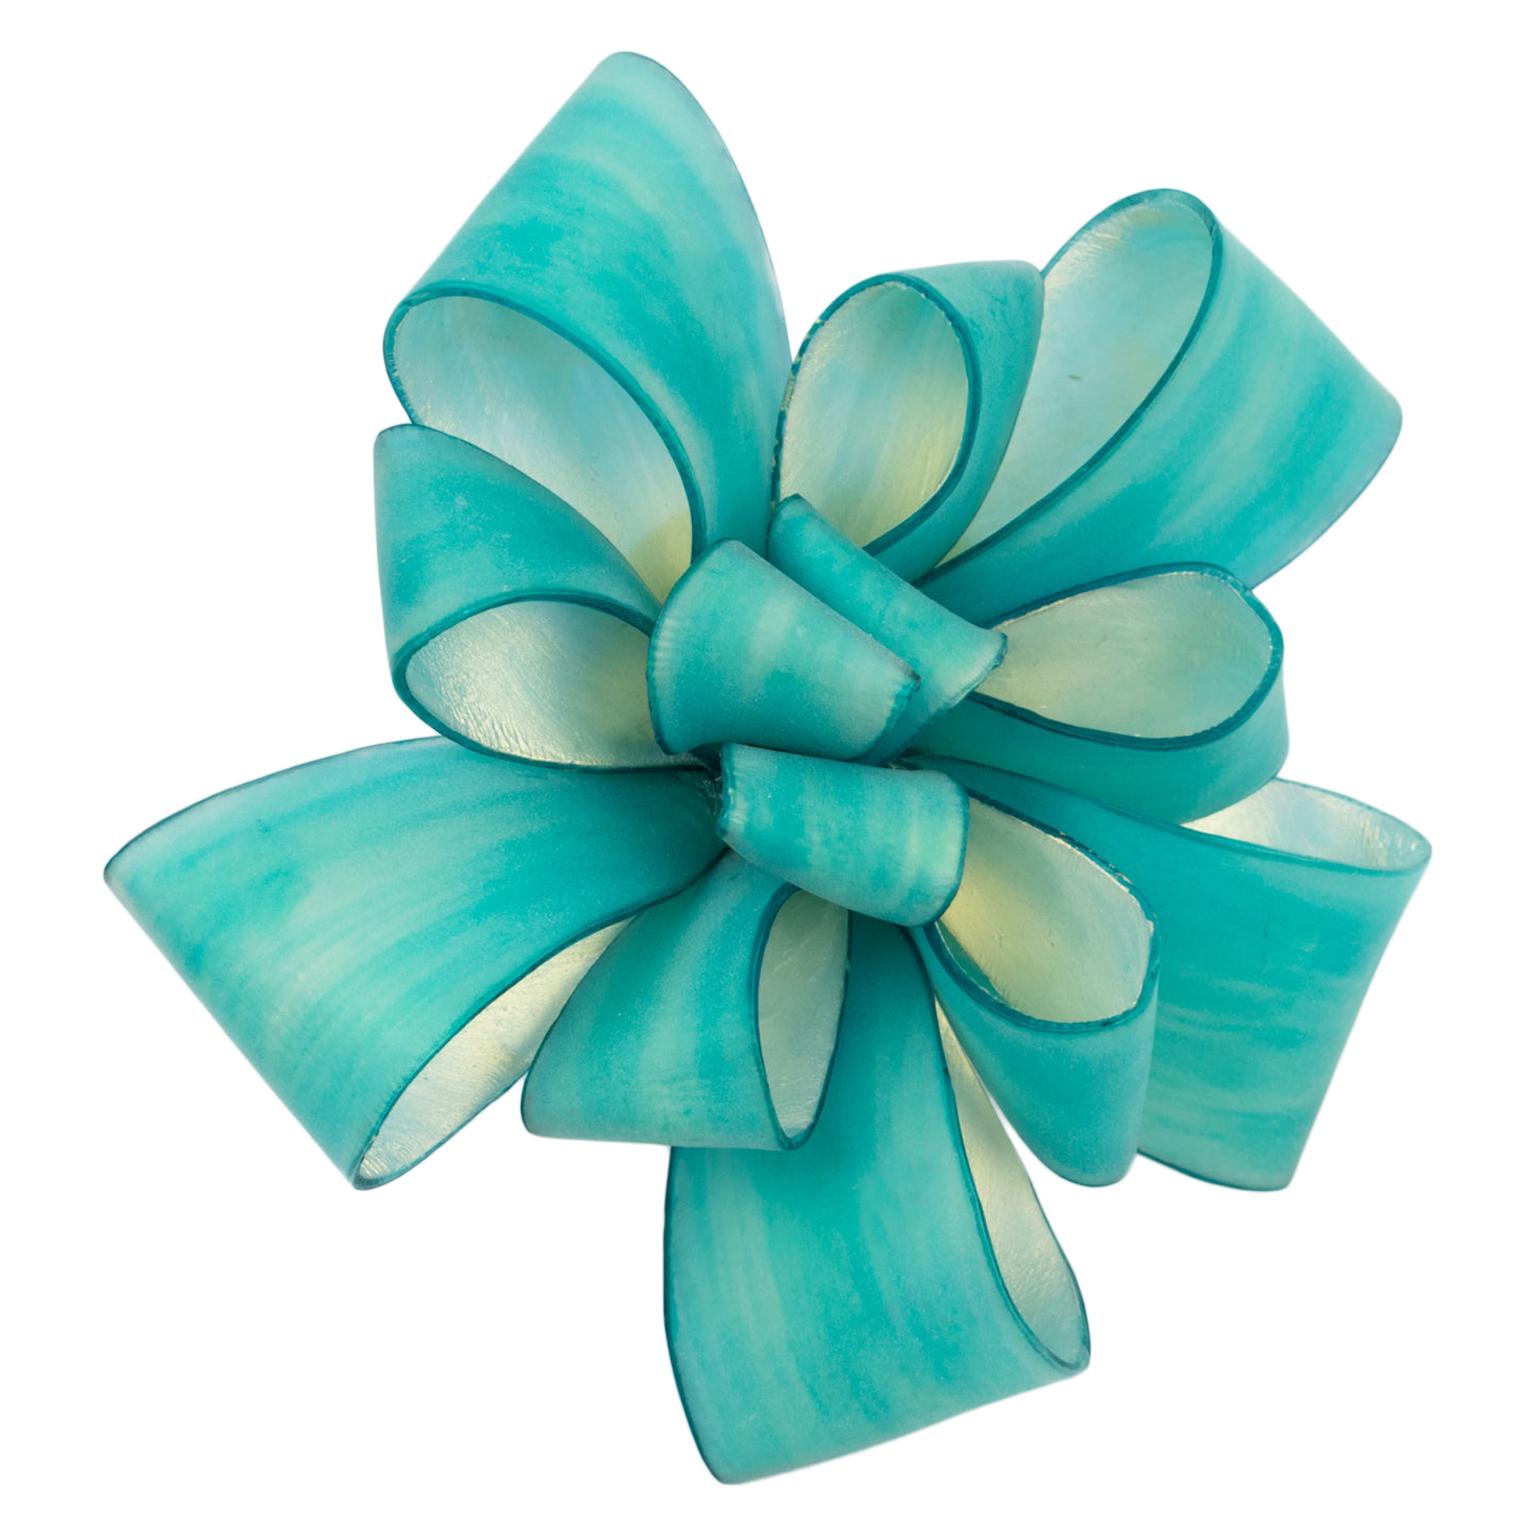 Cilea Paris Oversized Turquoise Resin Ribbon Pin Brooch